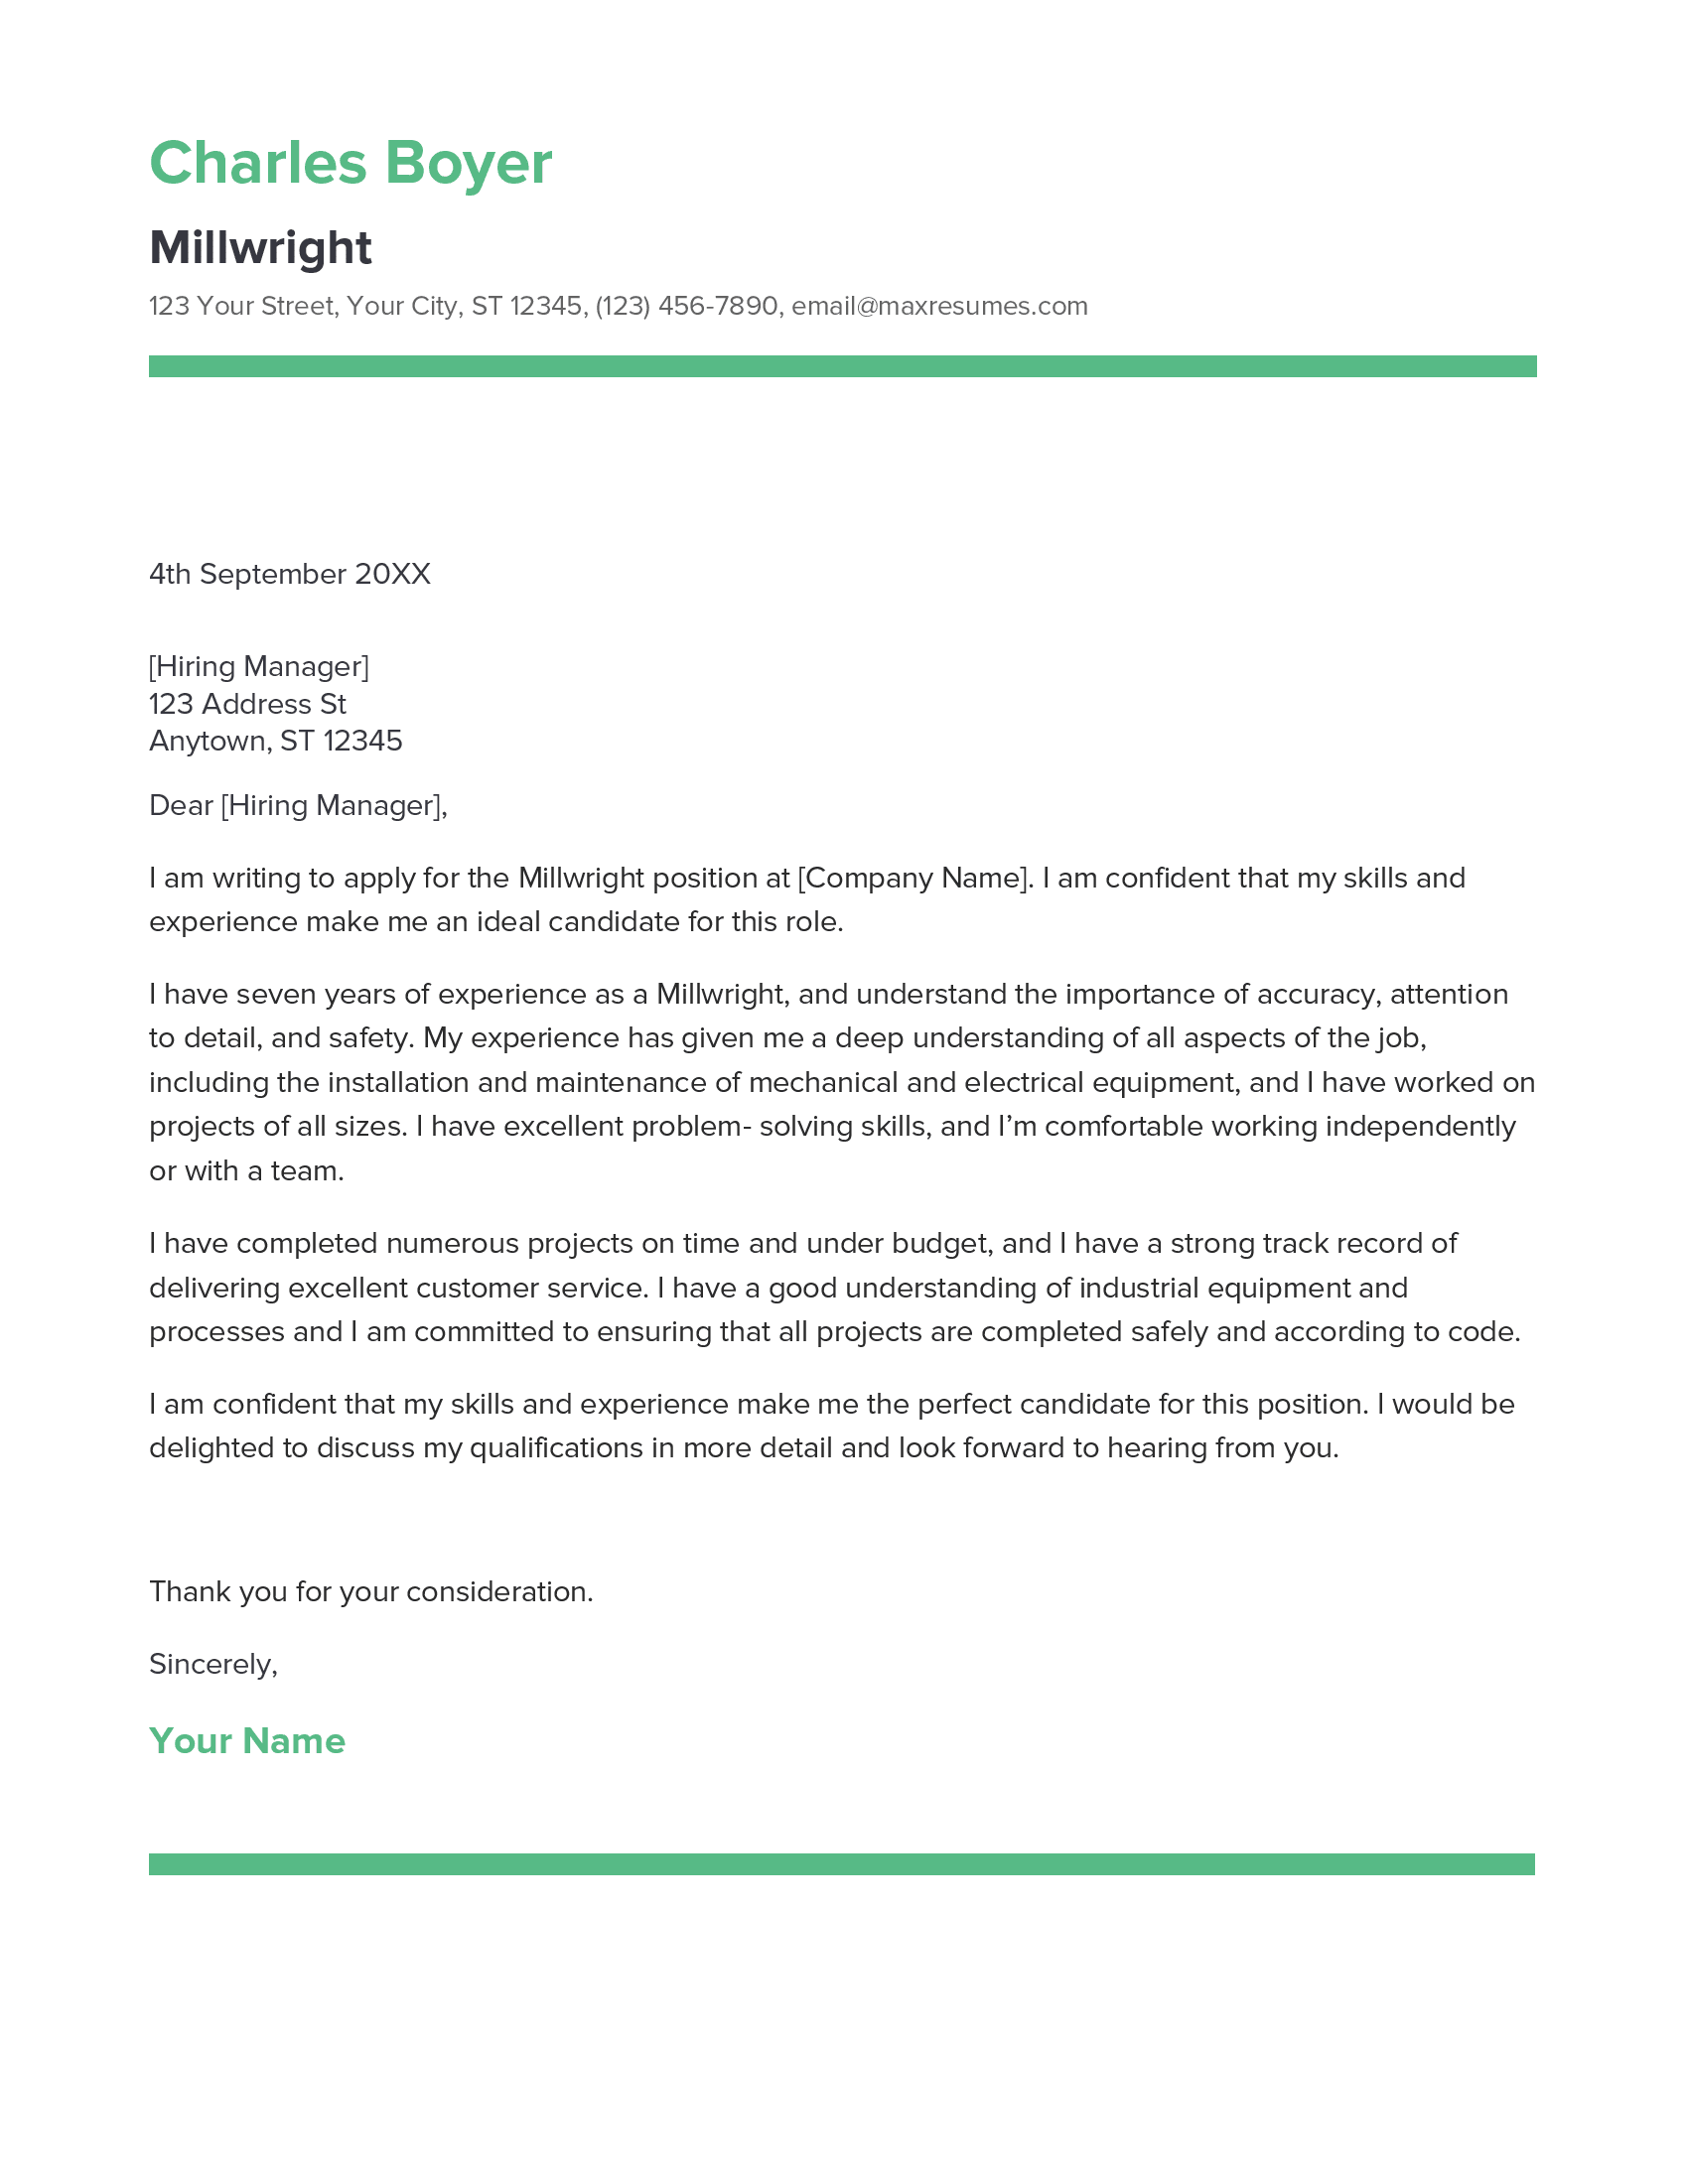 Millwright Cover Letter Example